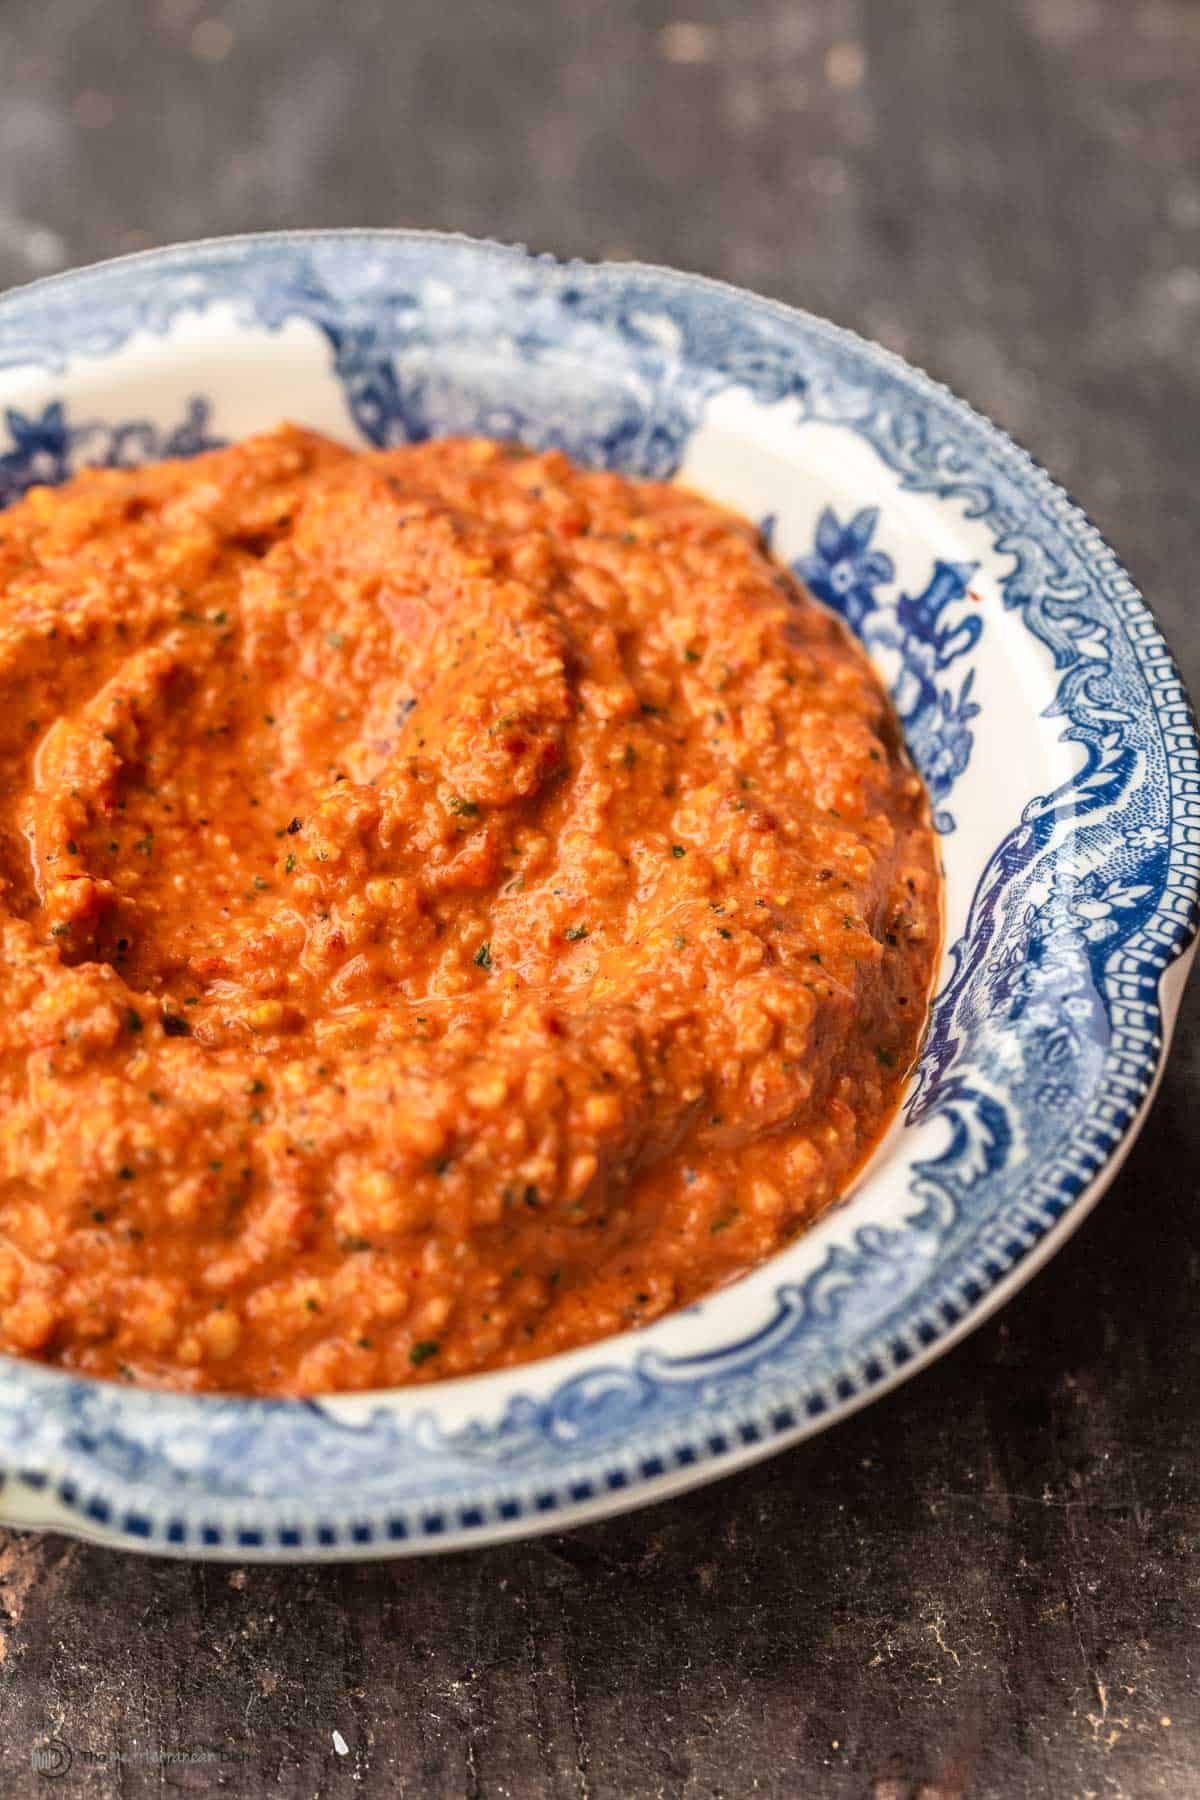 Roasted red pepper and fire roasted tomato sauce in a blue and white bowl